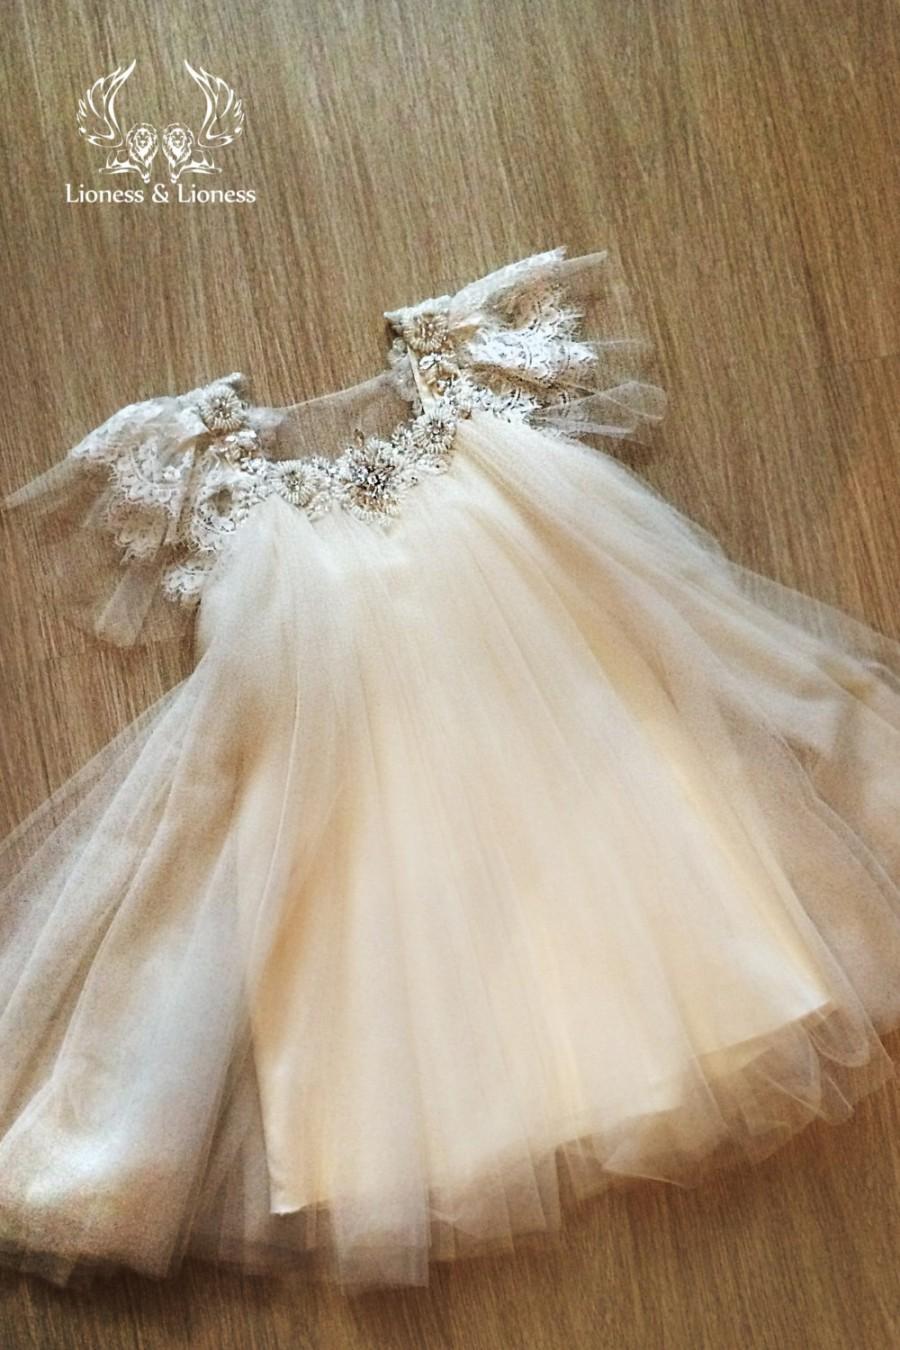 Mariage - Flower girl dress Lioness & Lioness. Lace flower girl dress. Tulle ivory flower girl dress. Flower girl dress lace. Flower girl dress ivory.